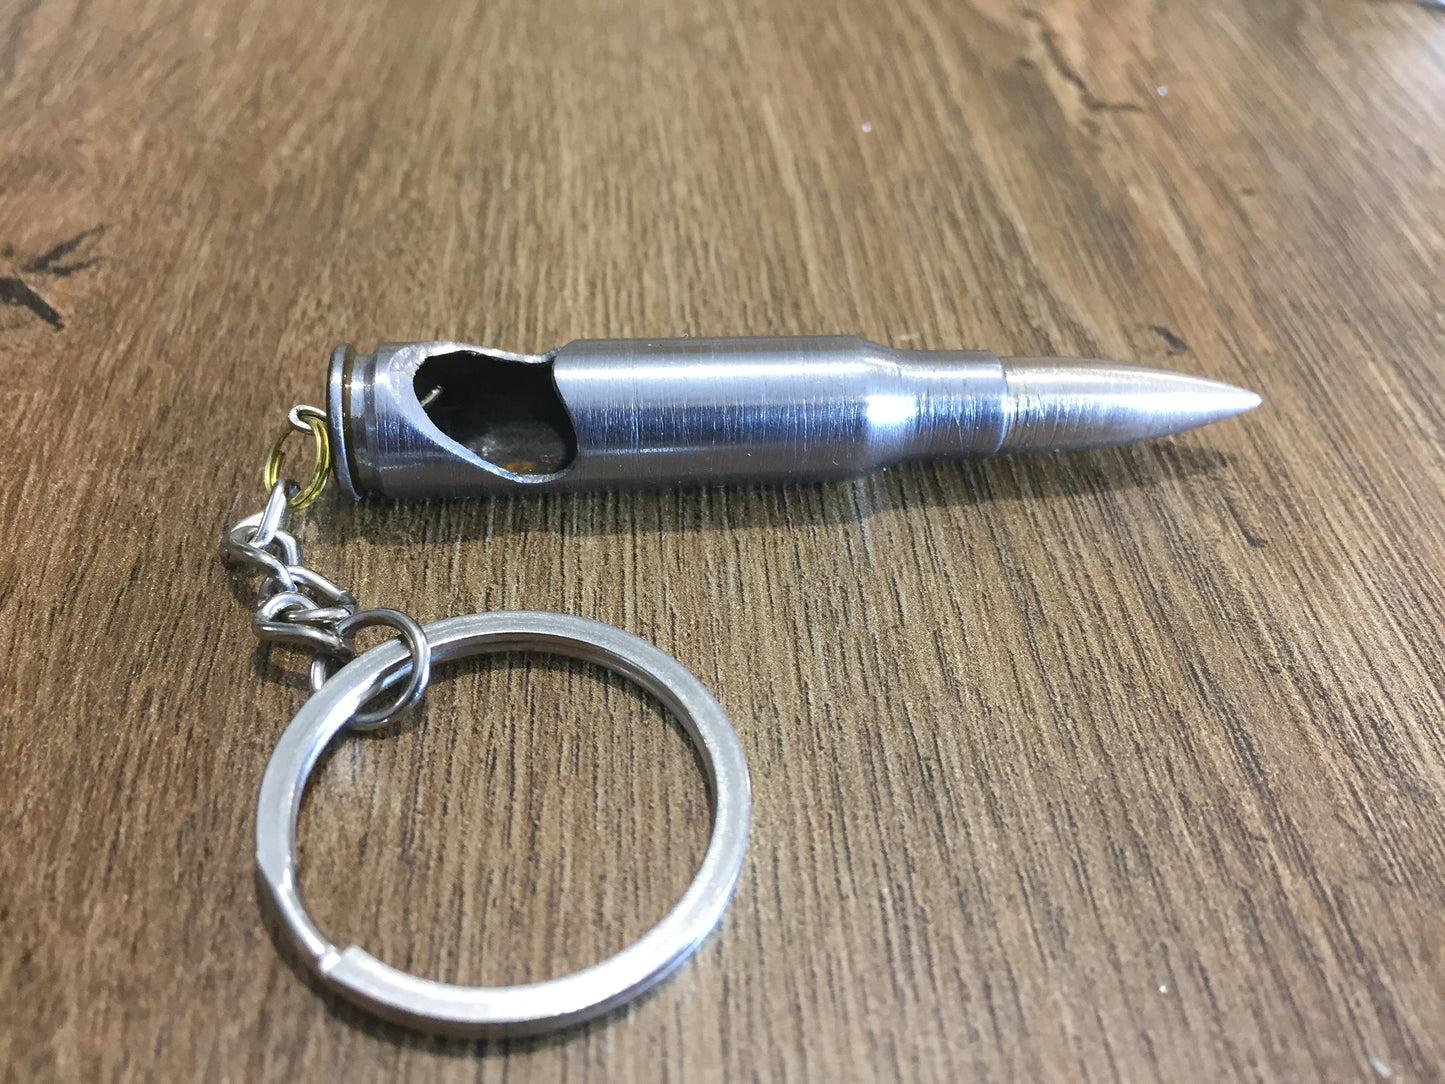 Bullet bottle opener, military gift, army military, keyring gift, keychain gift, iron gift for him, cool vintage gift,hunting gift,army gift